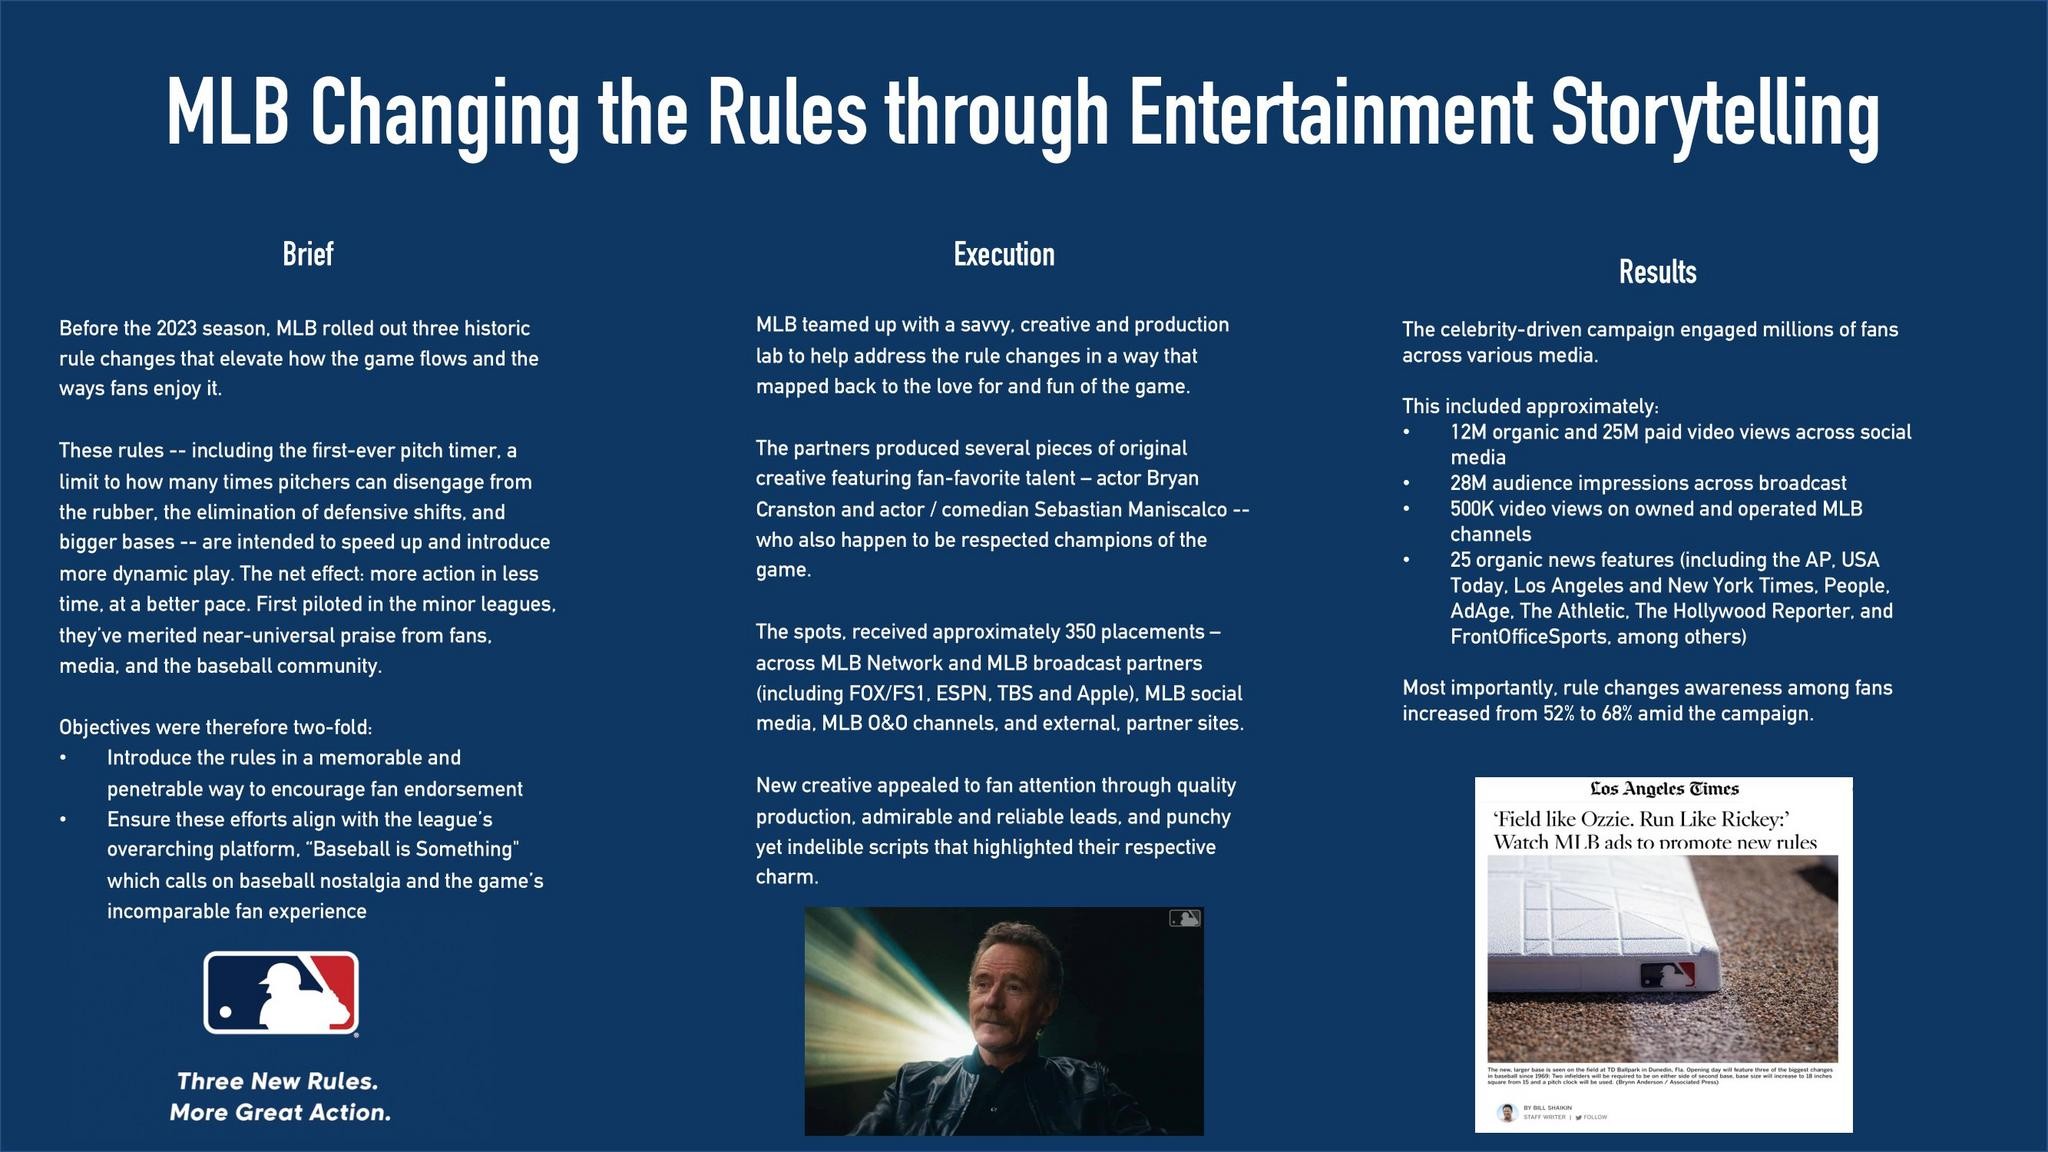 MLB CHANGING THE RULES THROUGH ENTERTAINMENT STORYTELLING